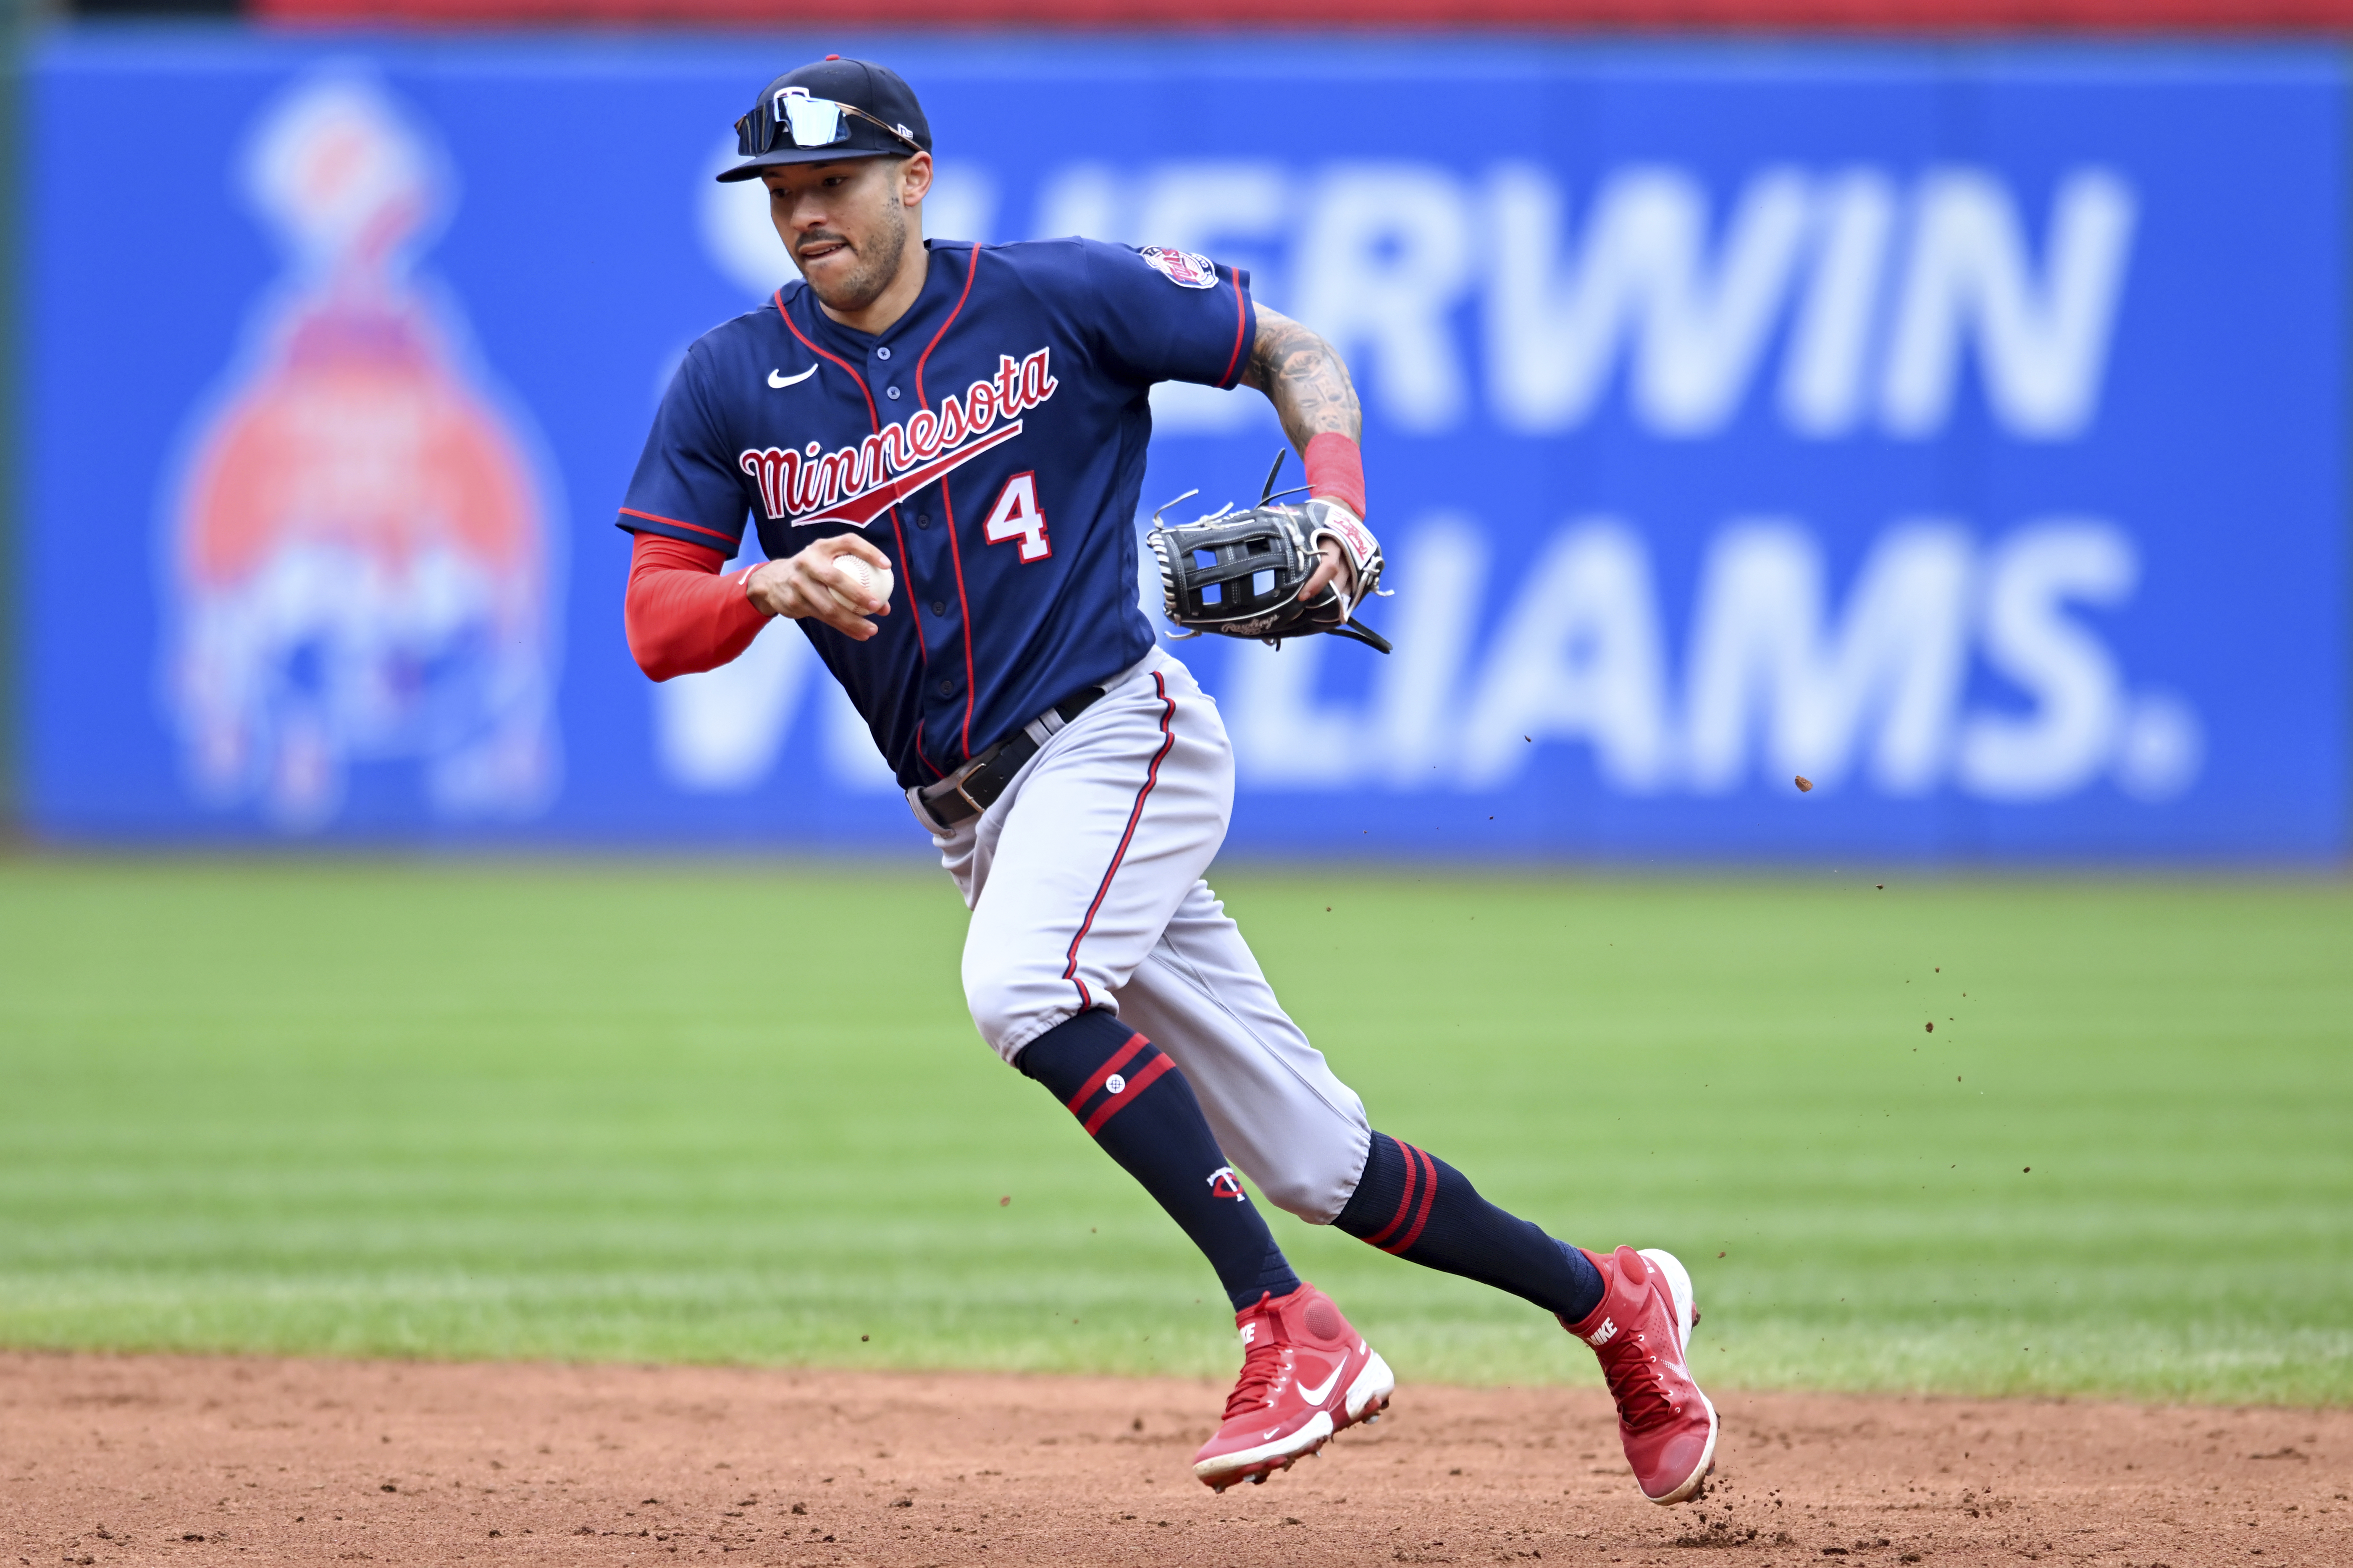 Carlos Correa agrees to sign with Twins after Mets' offer crumbles